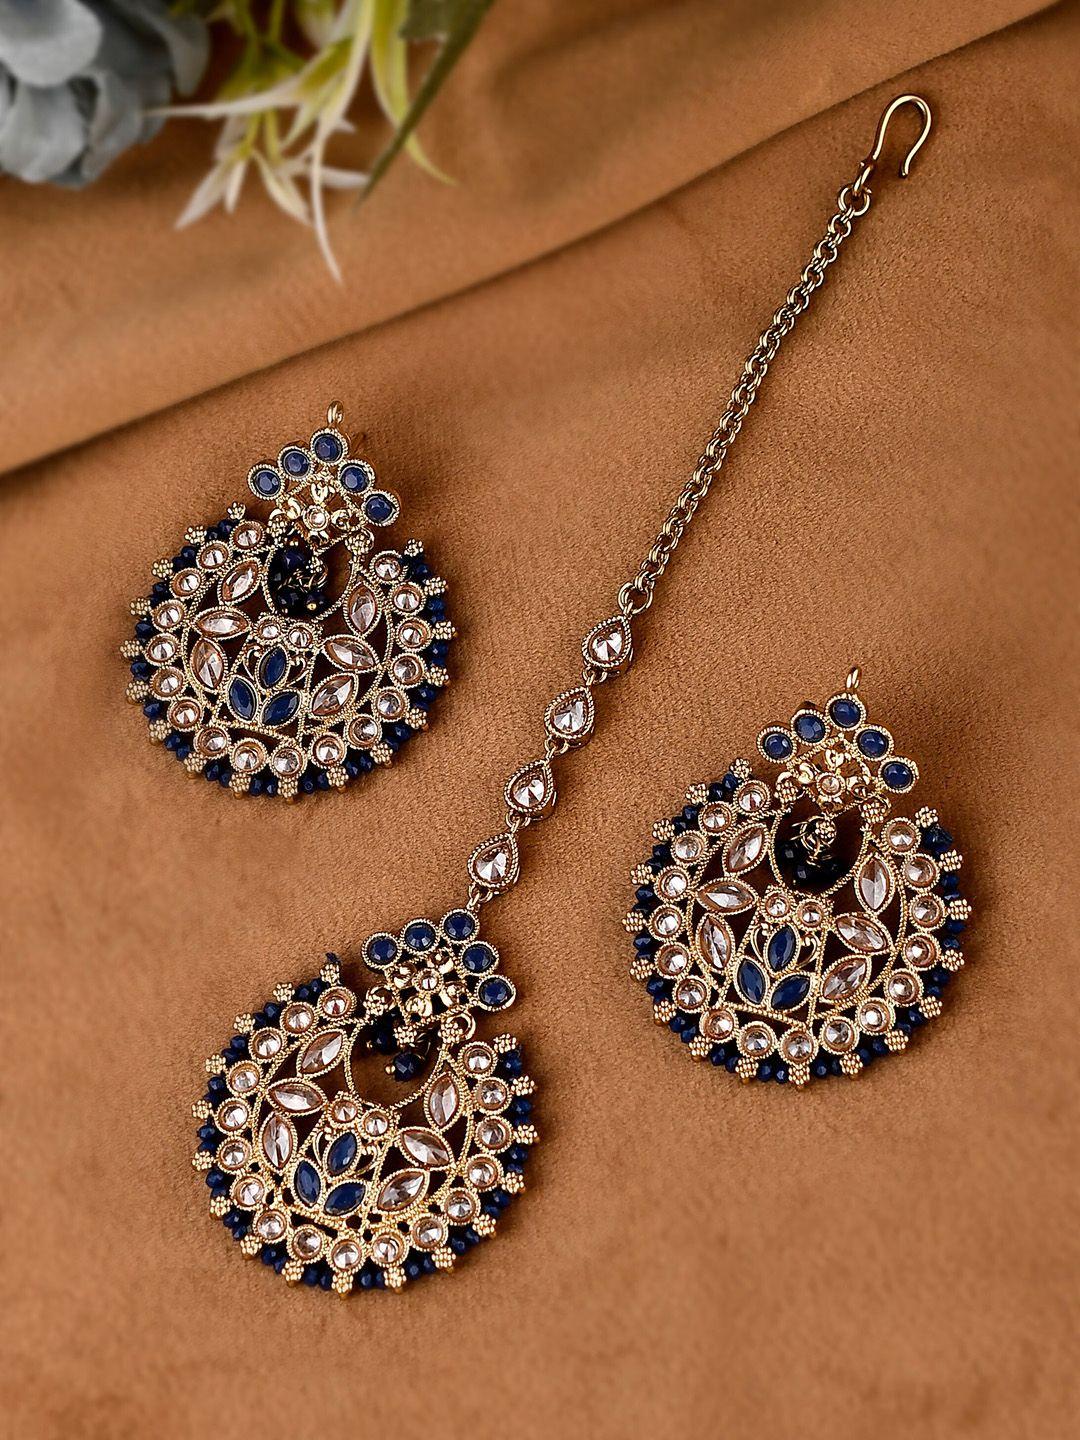 aquastreet jewels gold-plated american daimond  necklace & earrings set